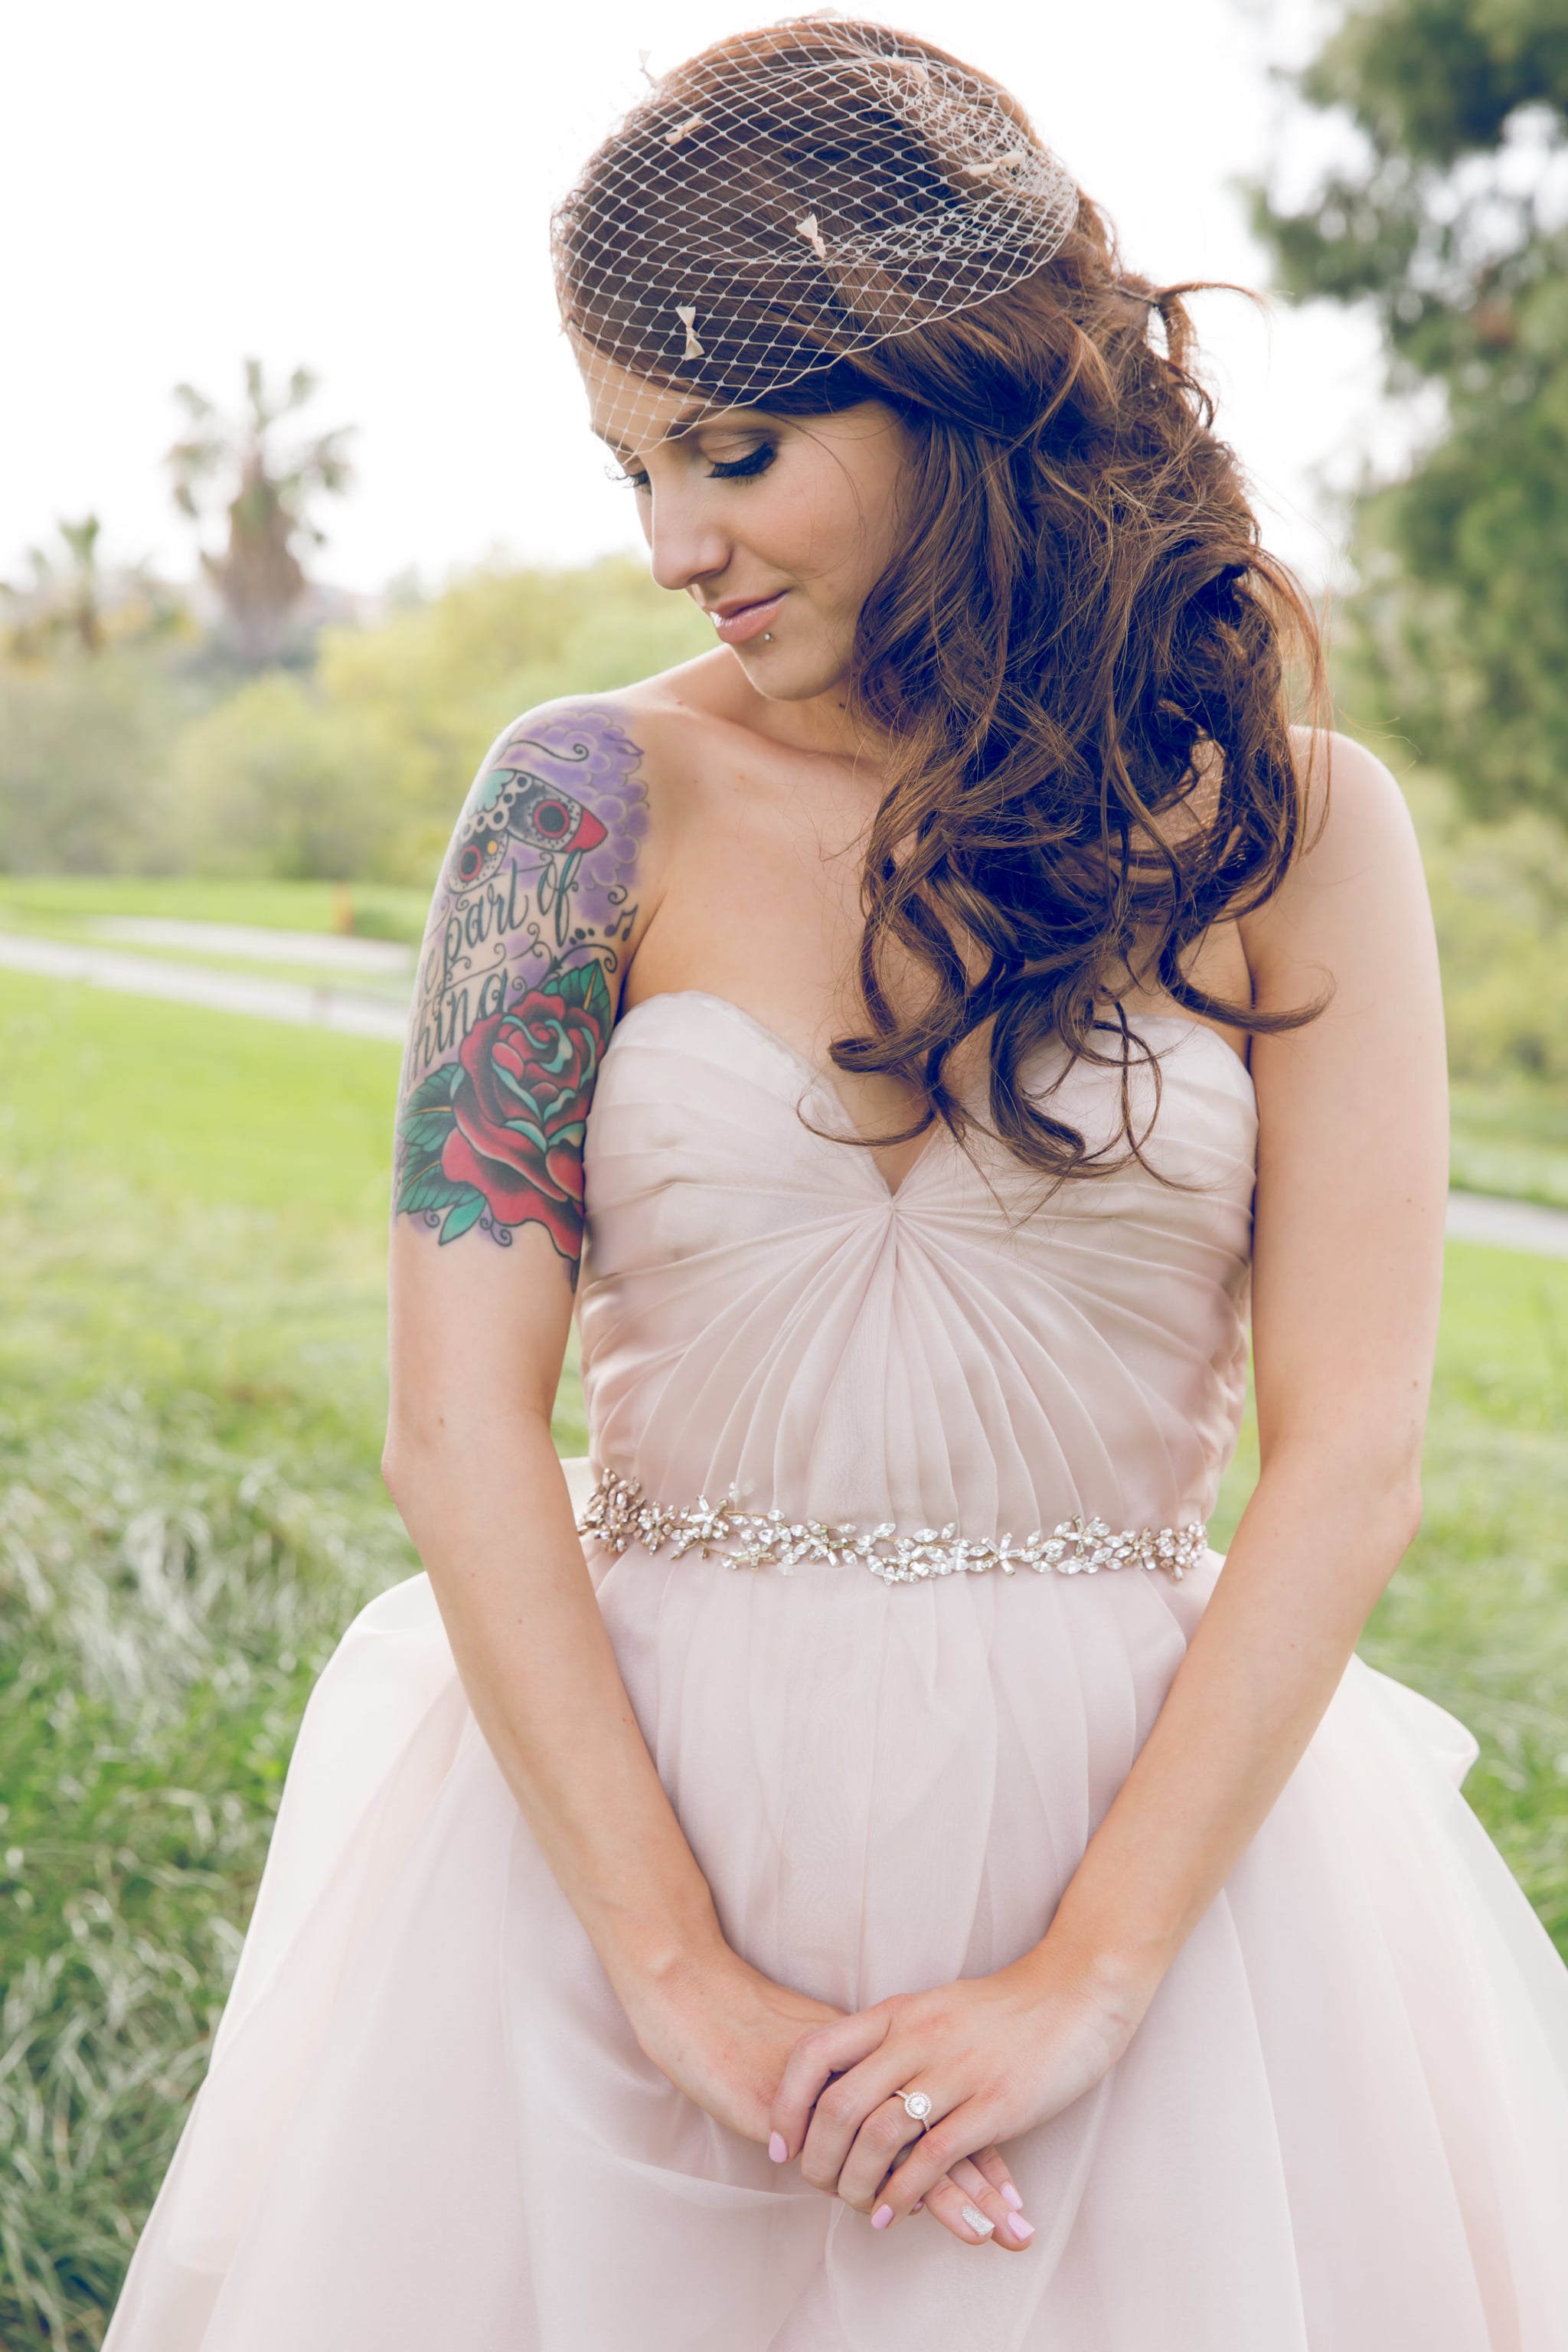 22 Beautiful Brides Who Showed Off Their Tattoos With Pride  Brides with  tattoos Beautiful bride Bride